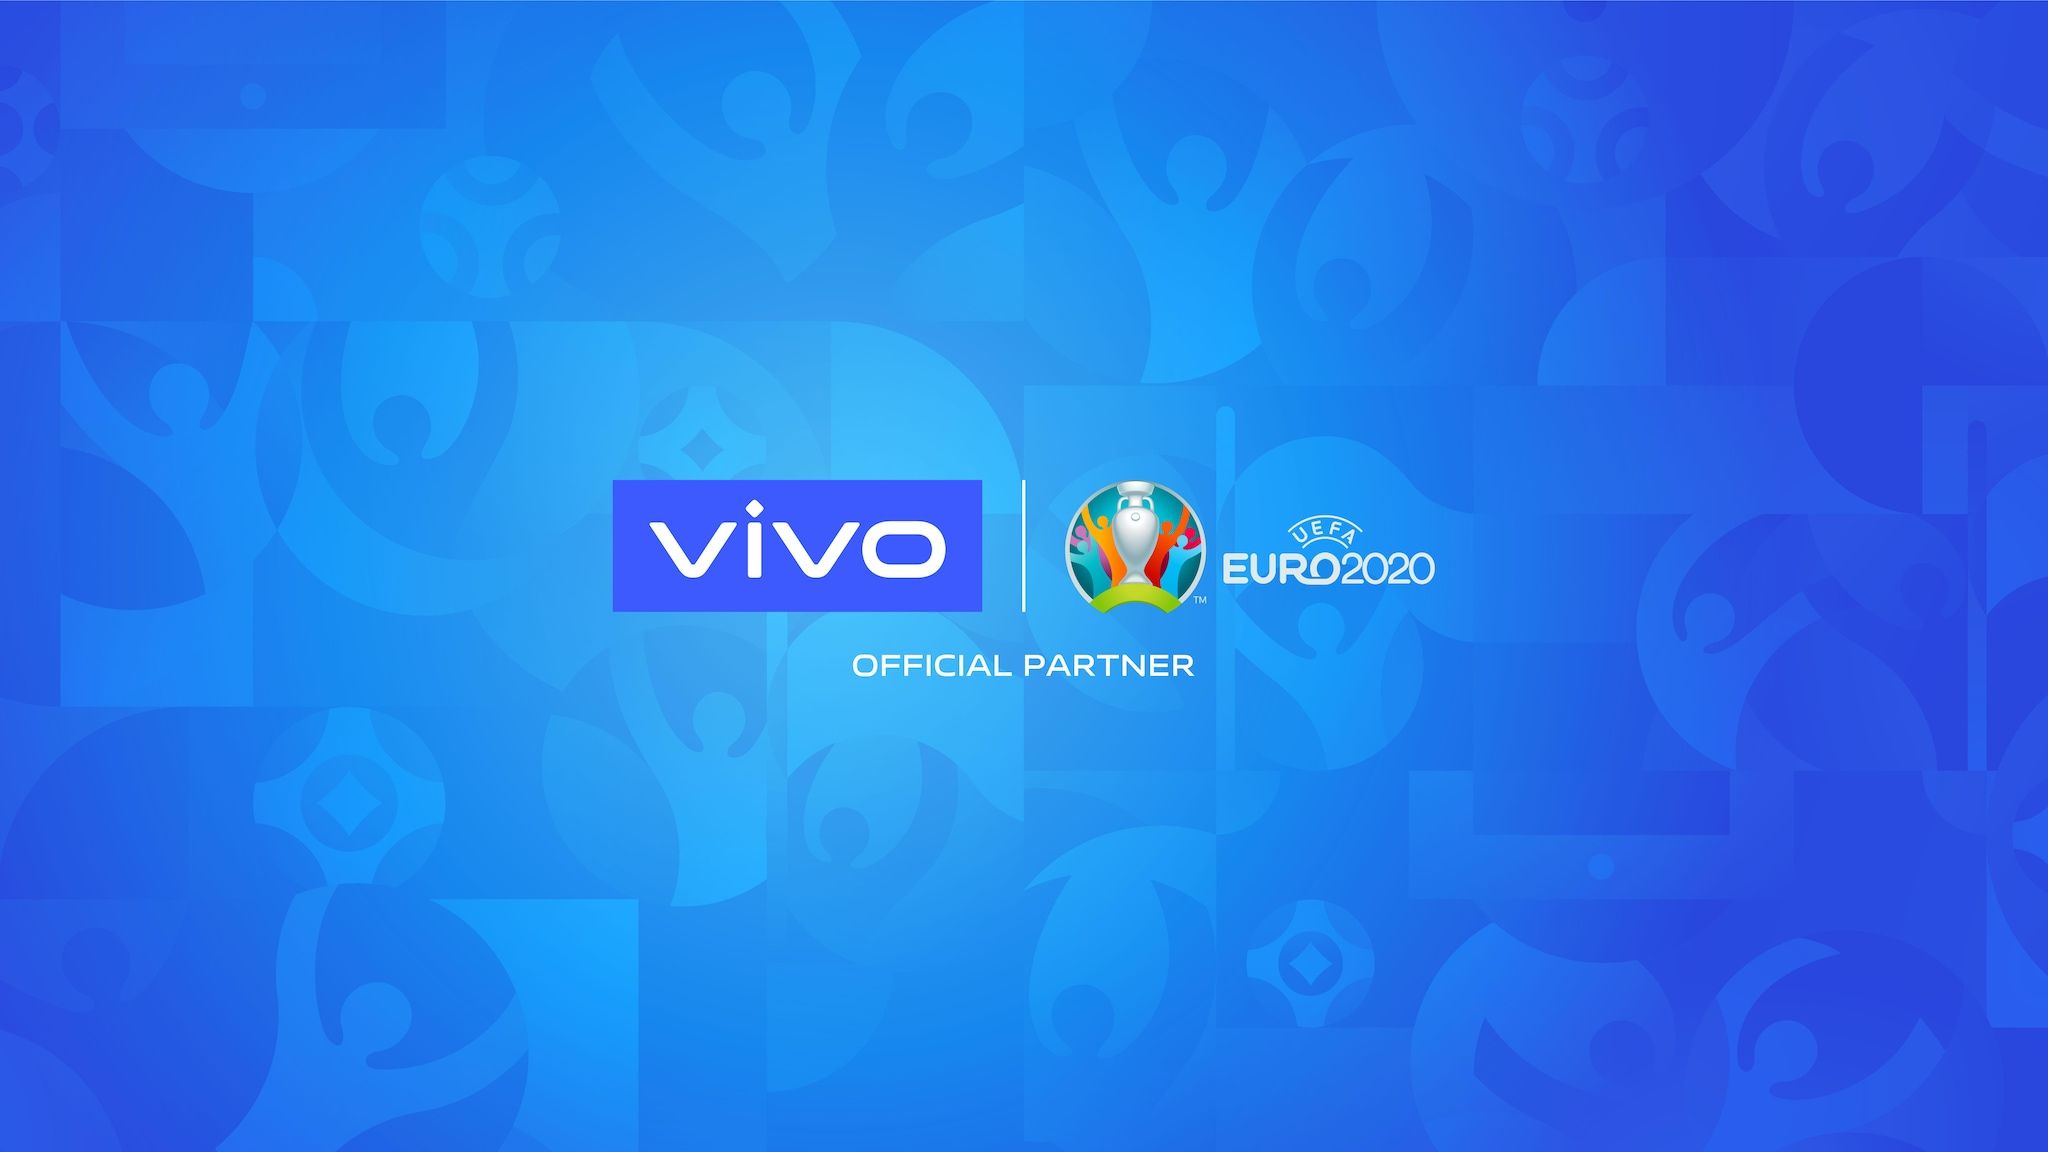 vivo becomes official partner of UEFA EURO 2020 and 2024